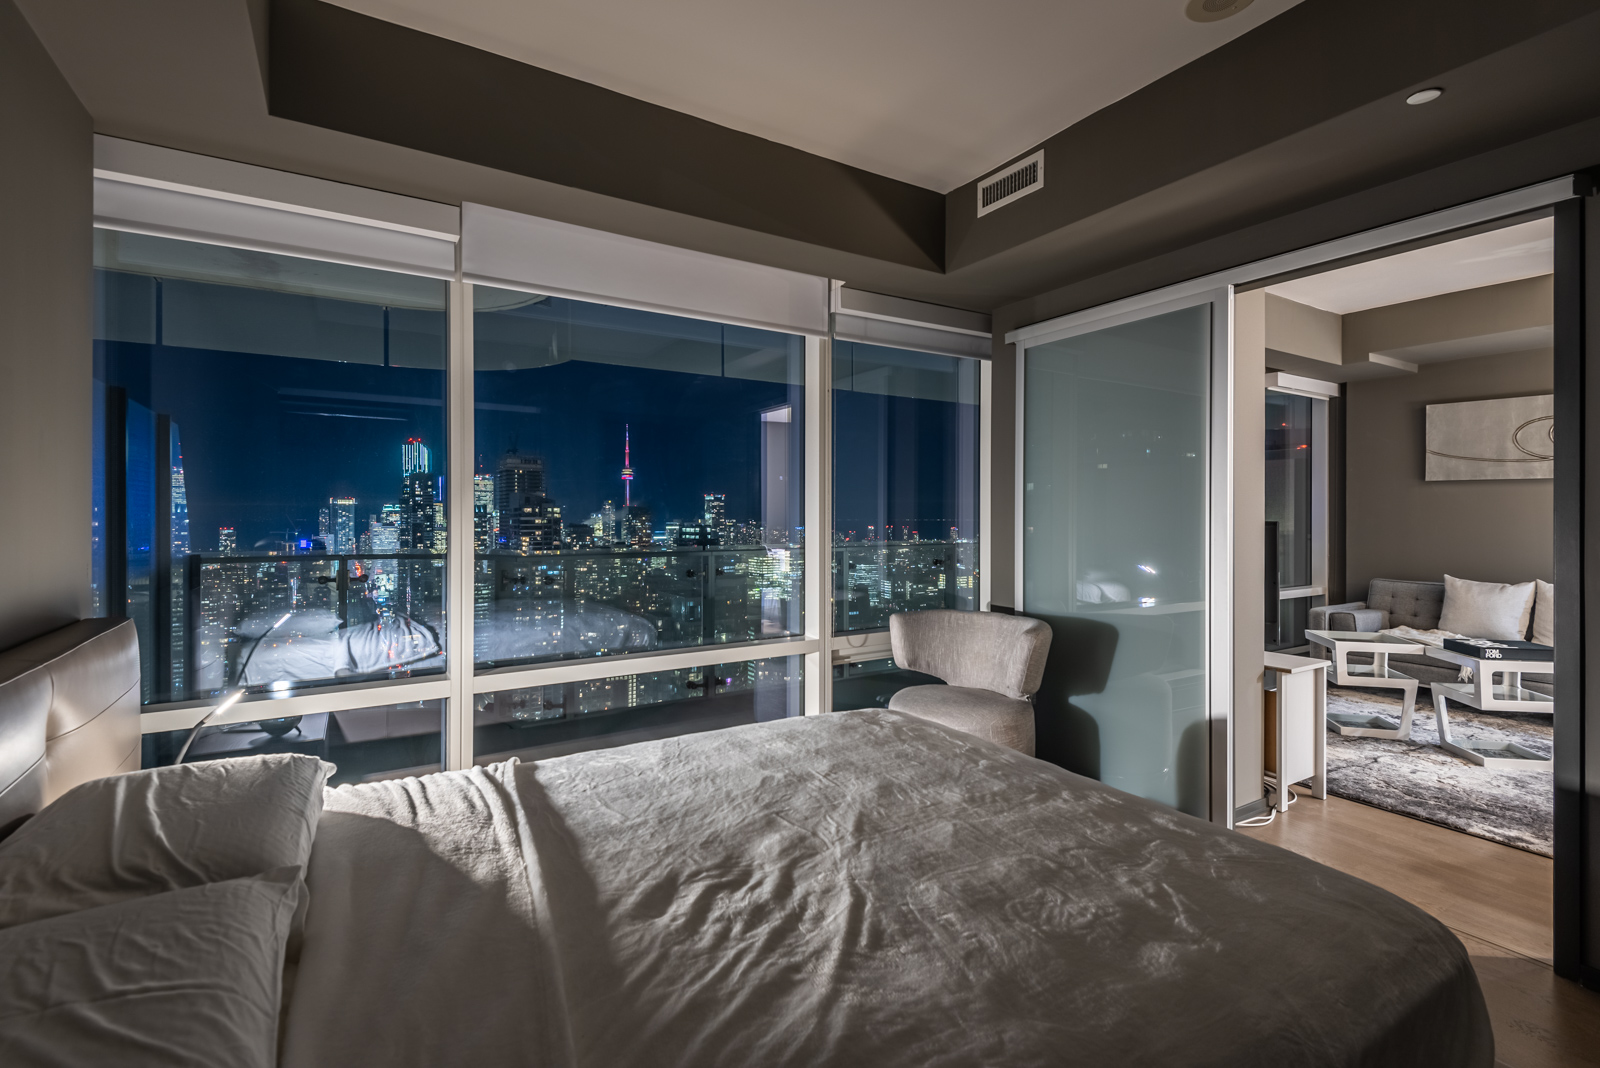 1 Bloor St E Unit 4305 master bedroom at night with 1 lamp; view of Toronto skyline, bright buildings and CN Tower.